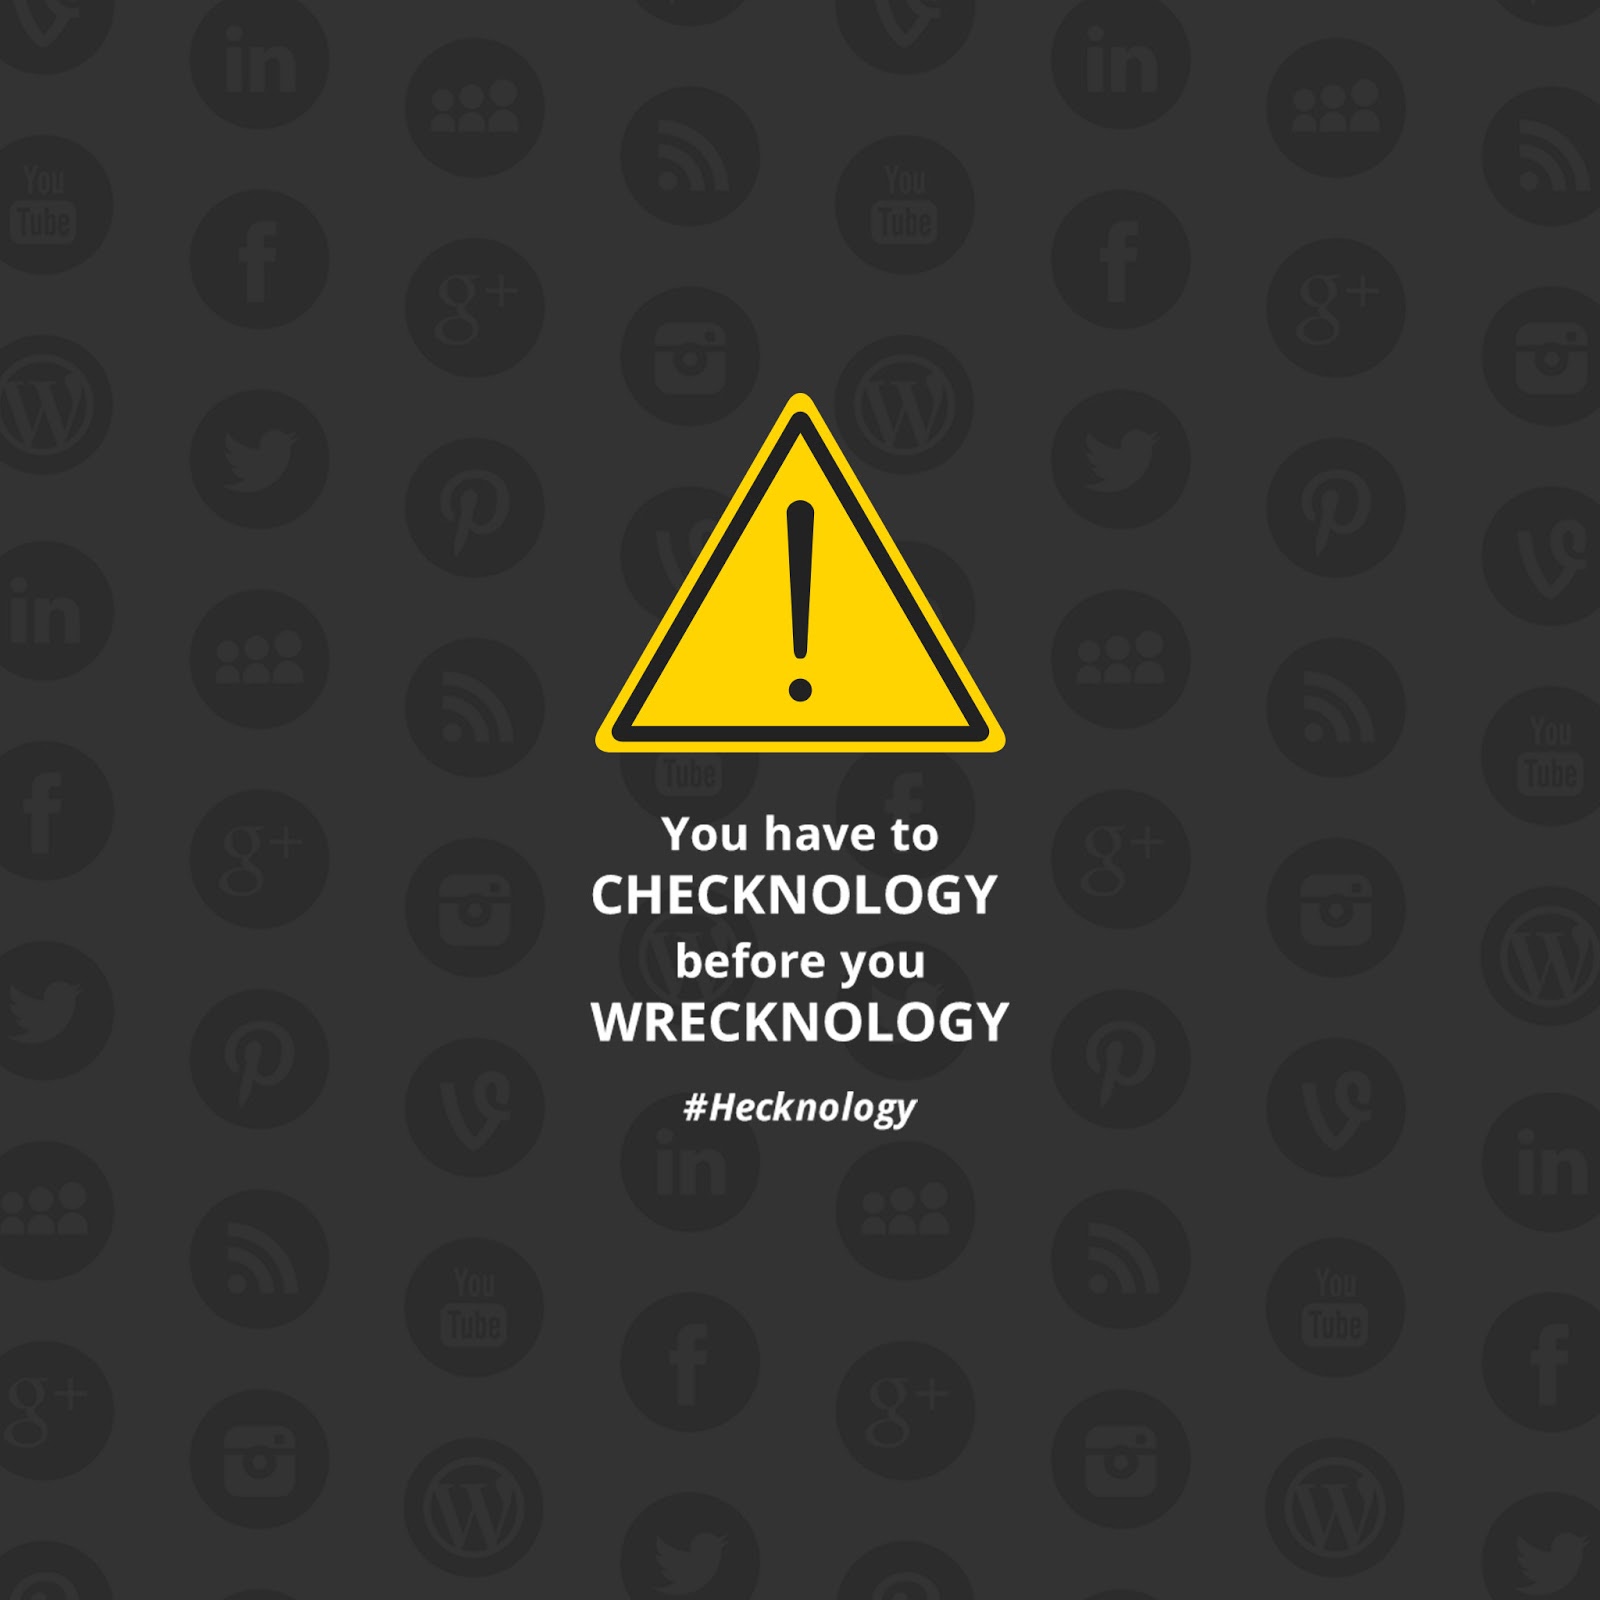 You Have To Checknology Before You Wrecknology - HD Wallpaper 